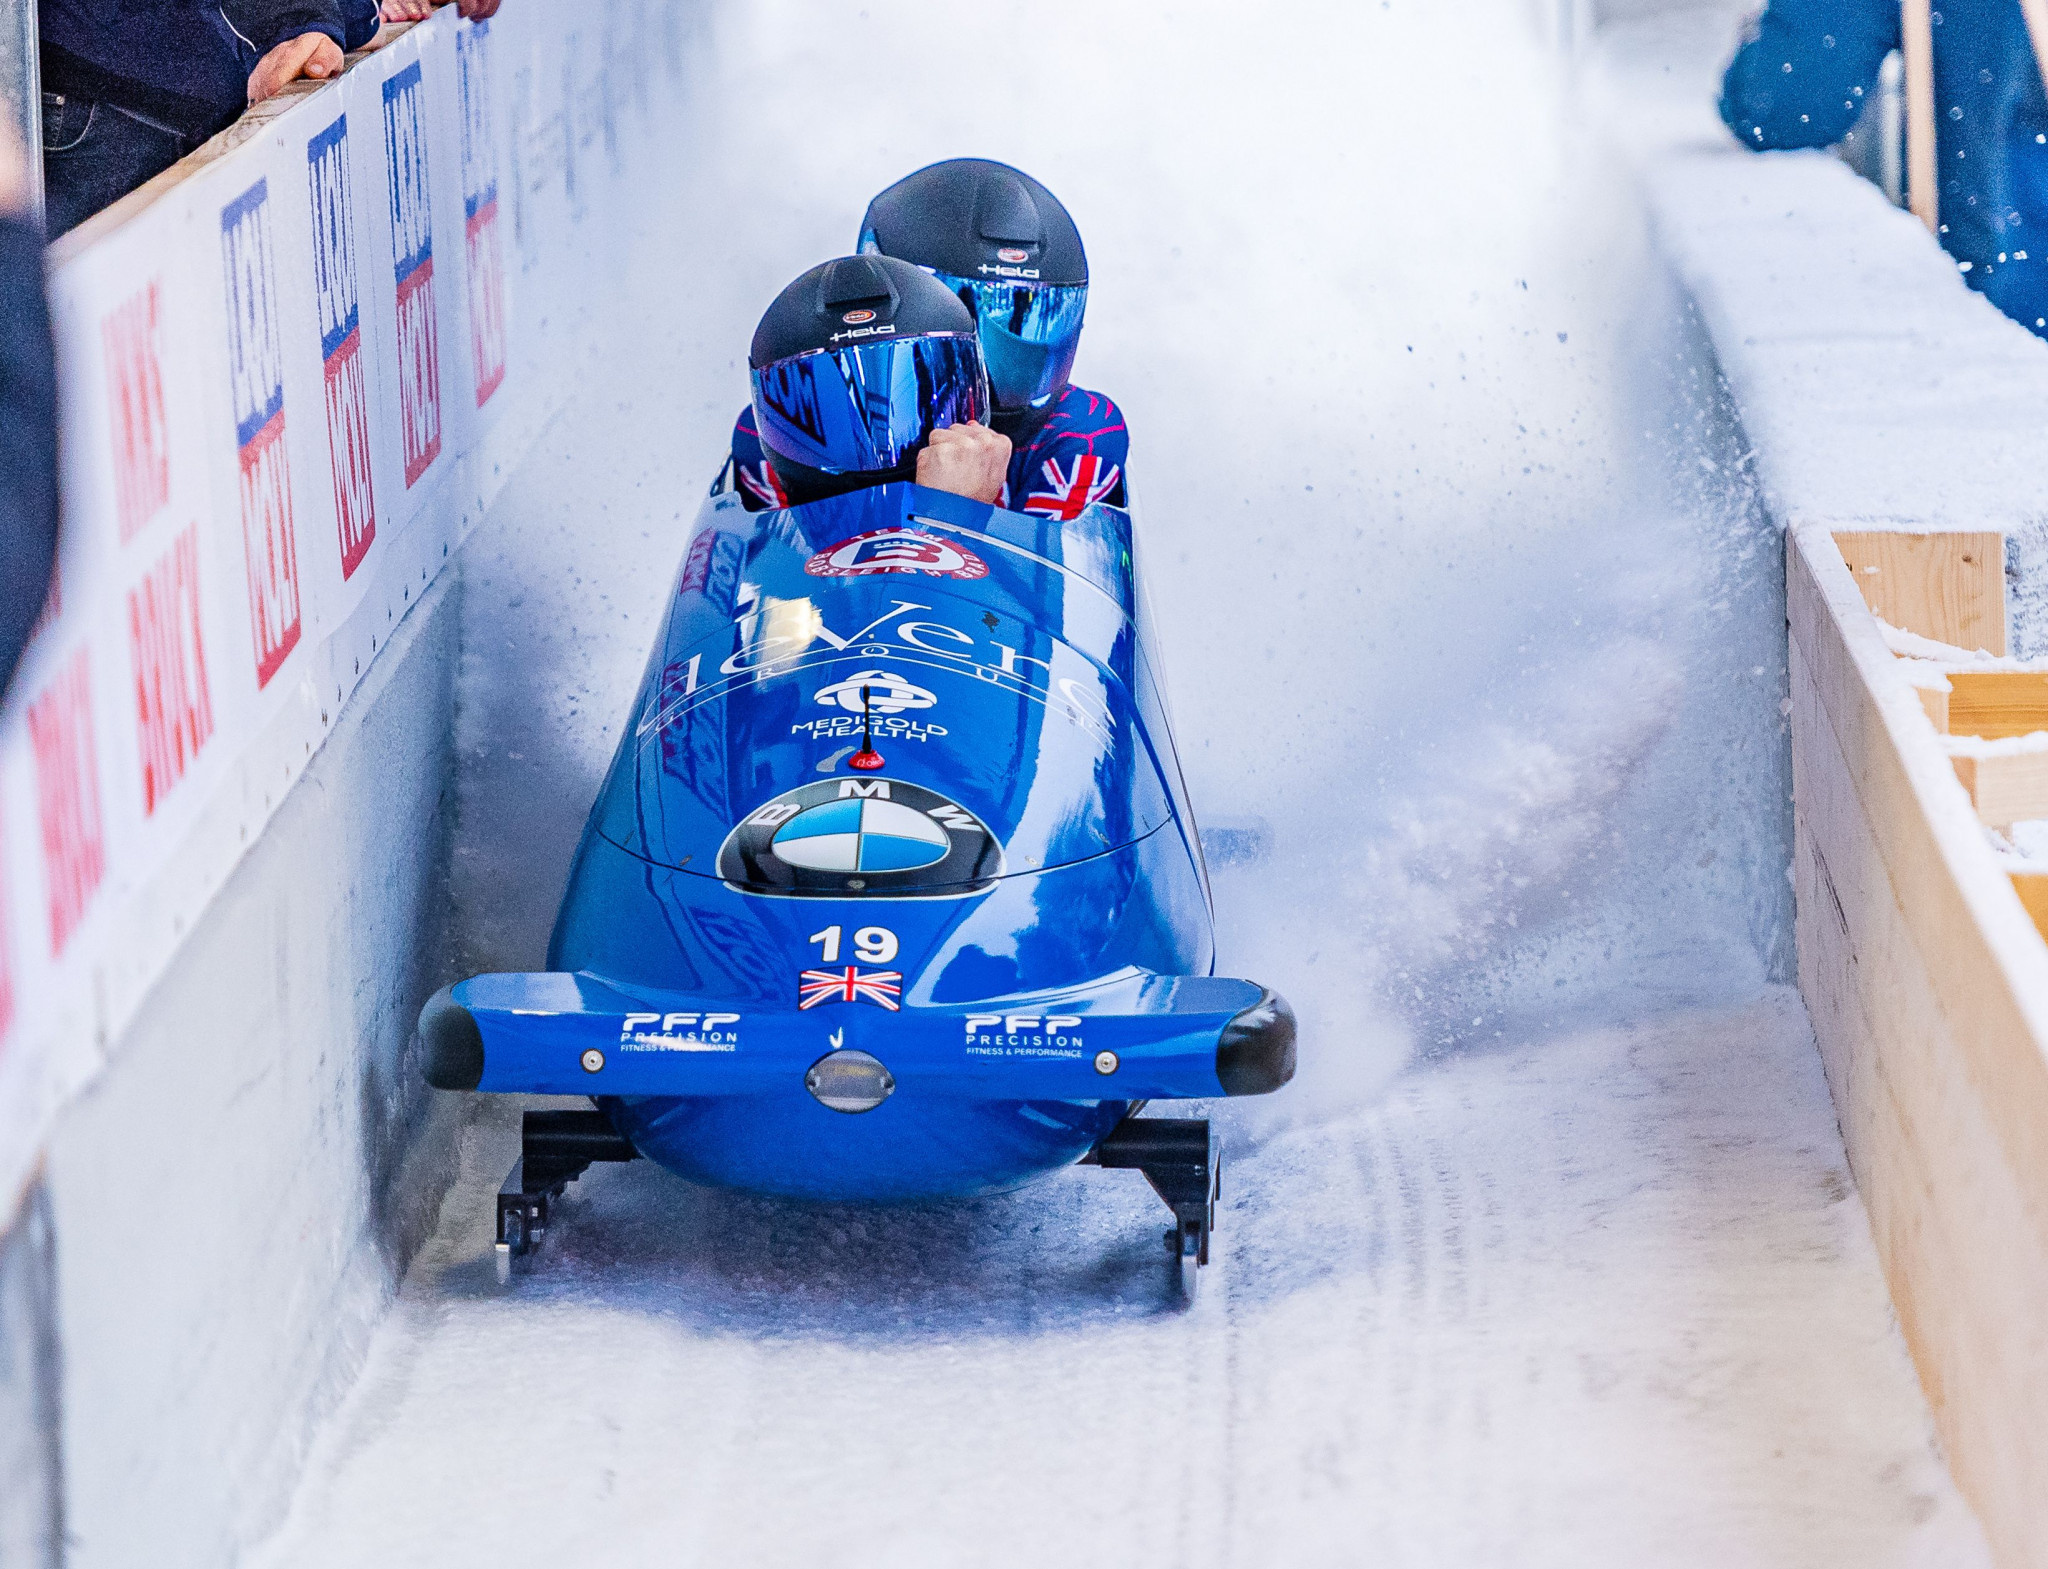 Bobsleigh: The British 2-man team at the world cup event, Competitive winter sports. 2050x1570 HD Wallpaper.